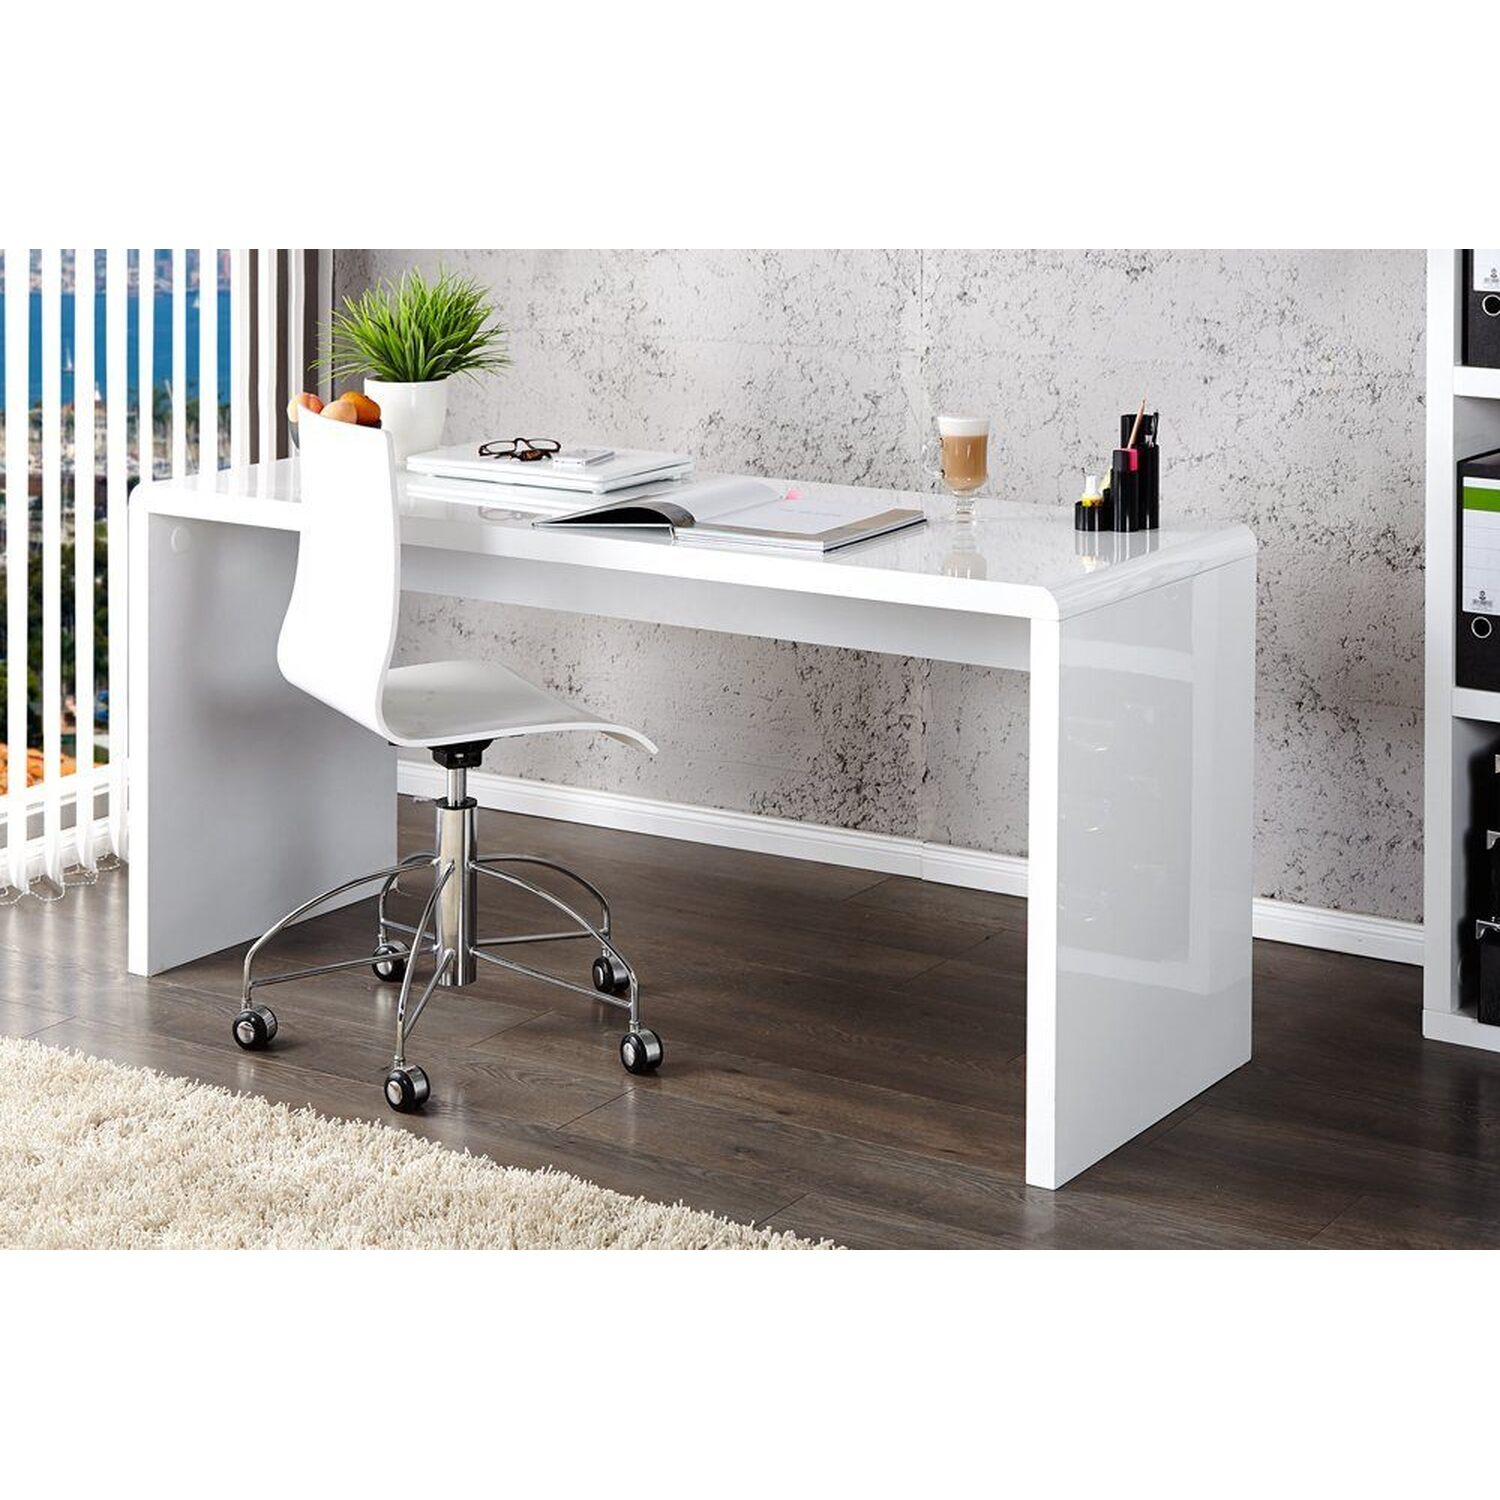 Designer Gloss White lacquer desk 1200 w x 600 d x 750 h with curved panels 